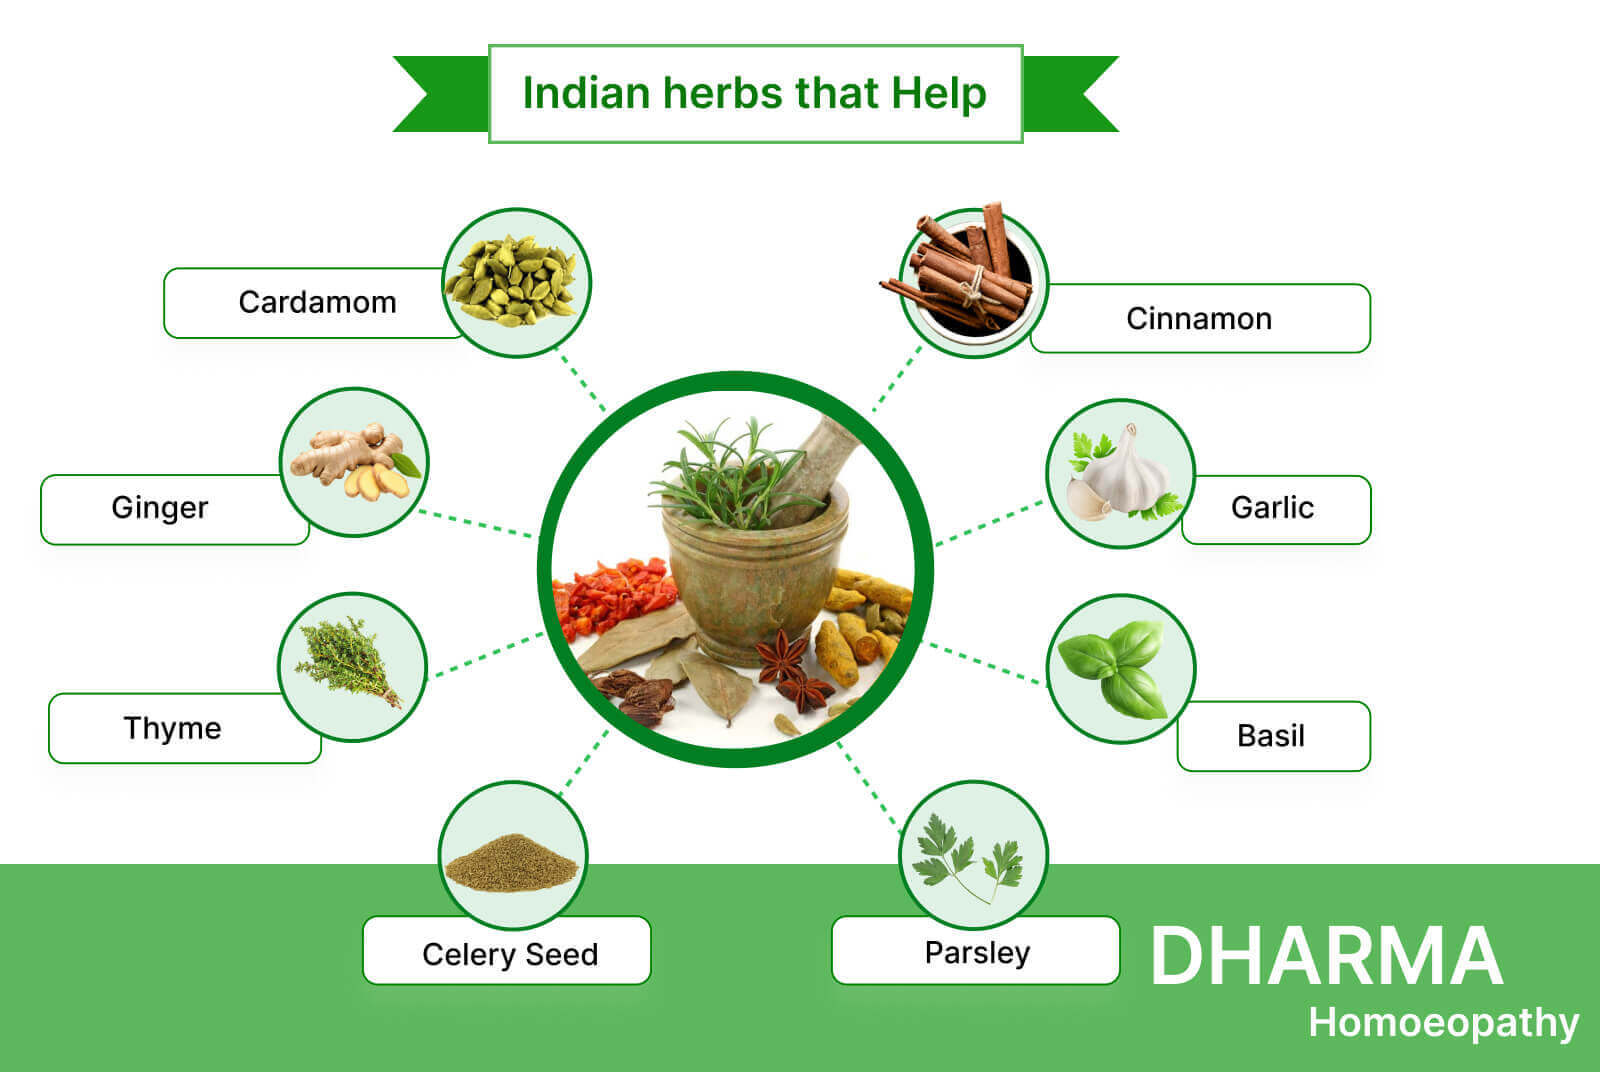 Indian herbs that help